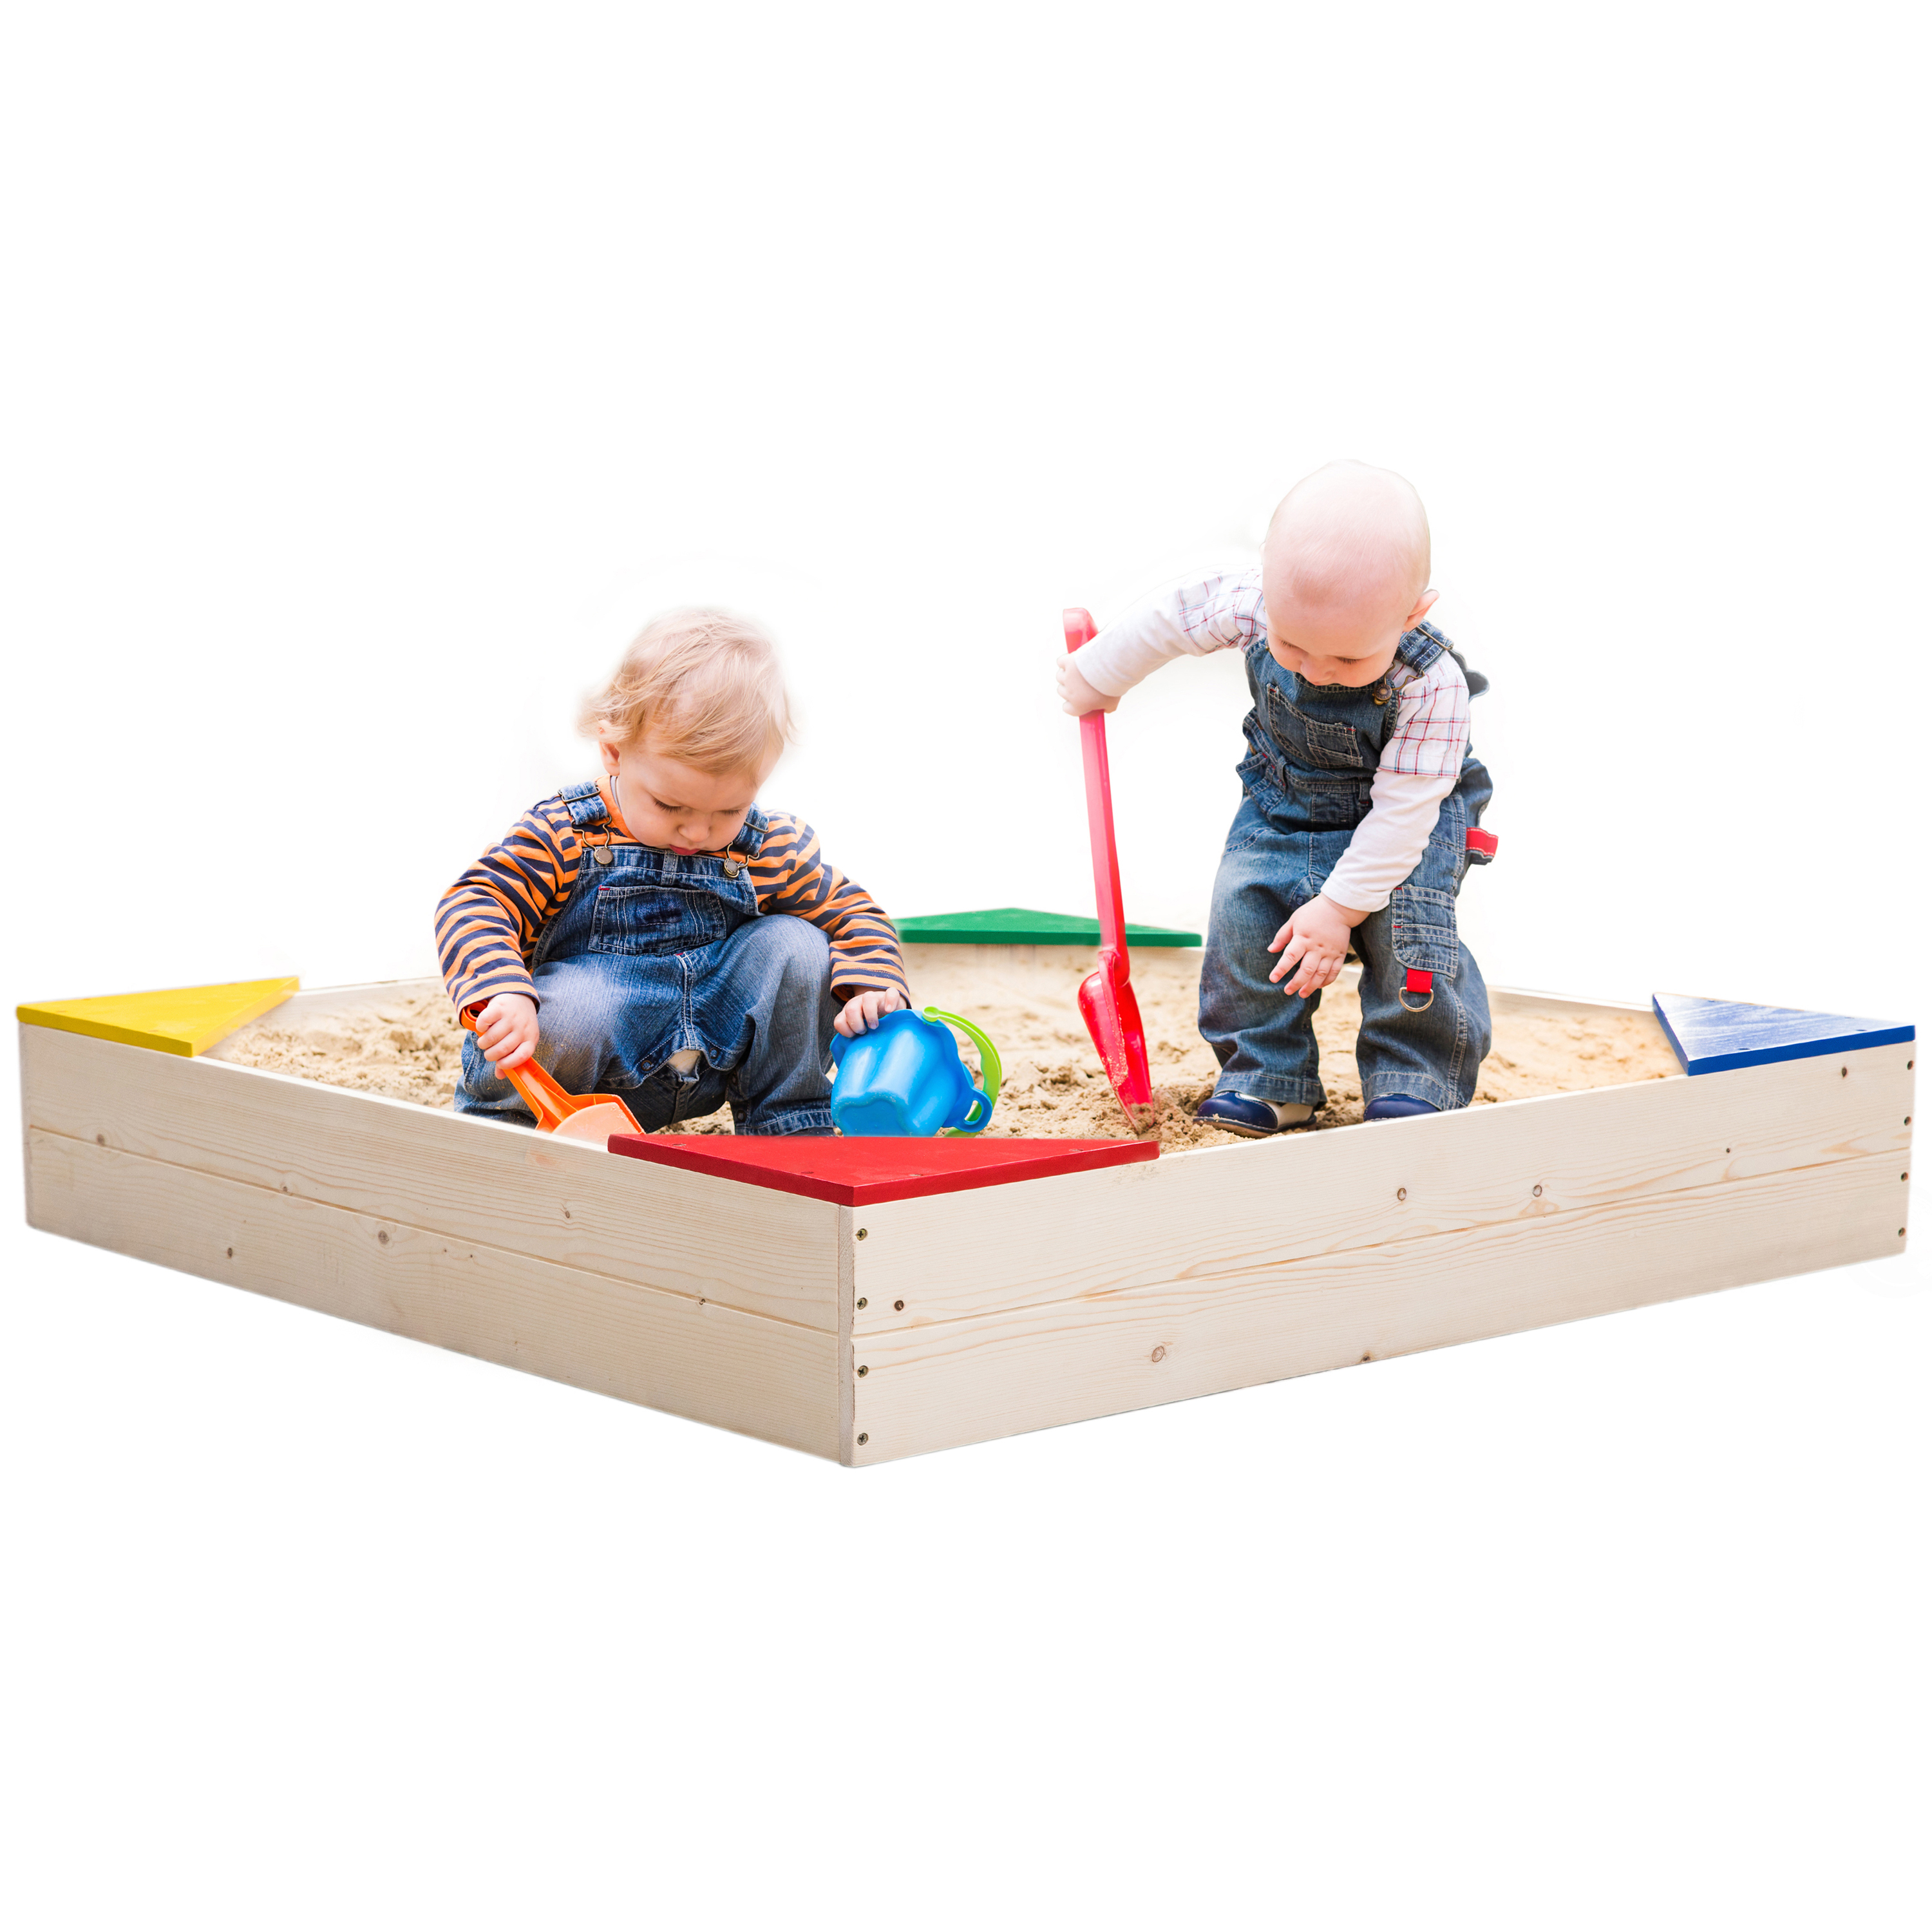 Outdoor Wooden Sand Box With Floor Cover And Waterproof Protection Cover, Square Sandpit For Kids